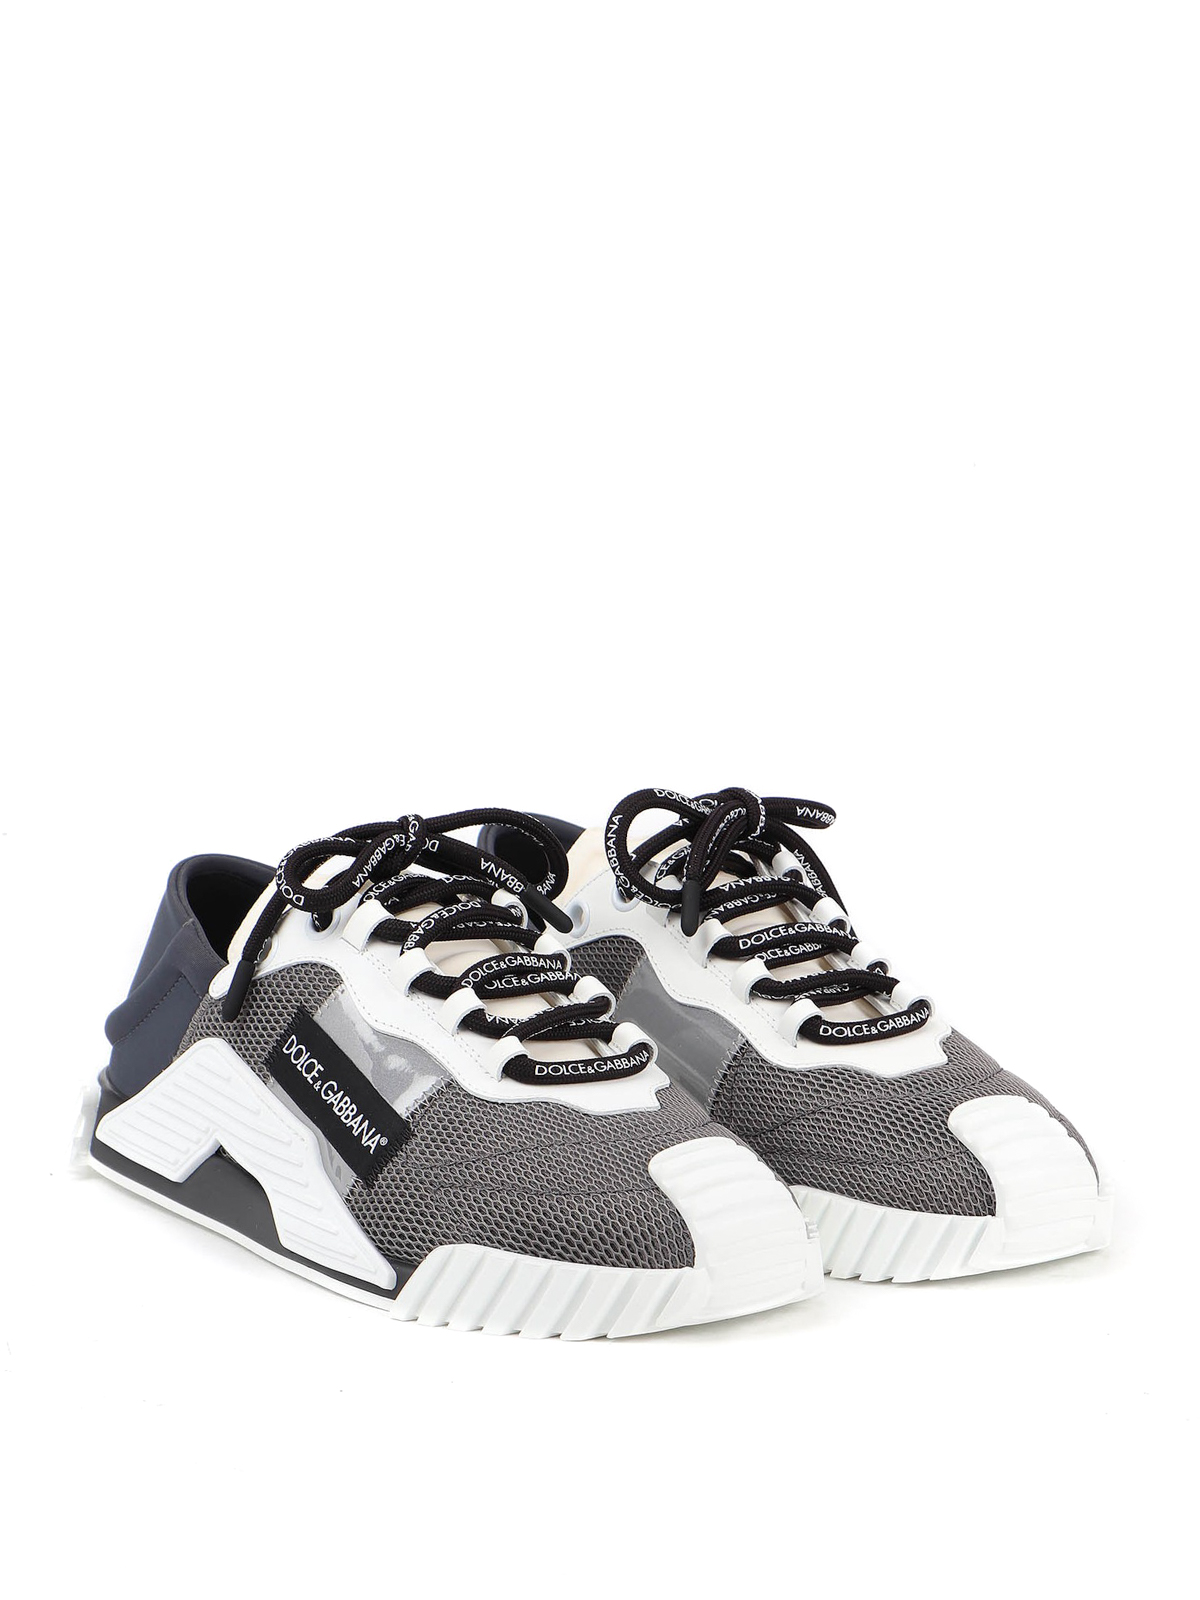 Trainers Dolce & Gabbana - NS1 mixed materials black sneakers ...